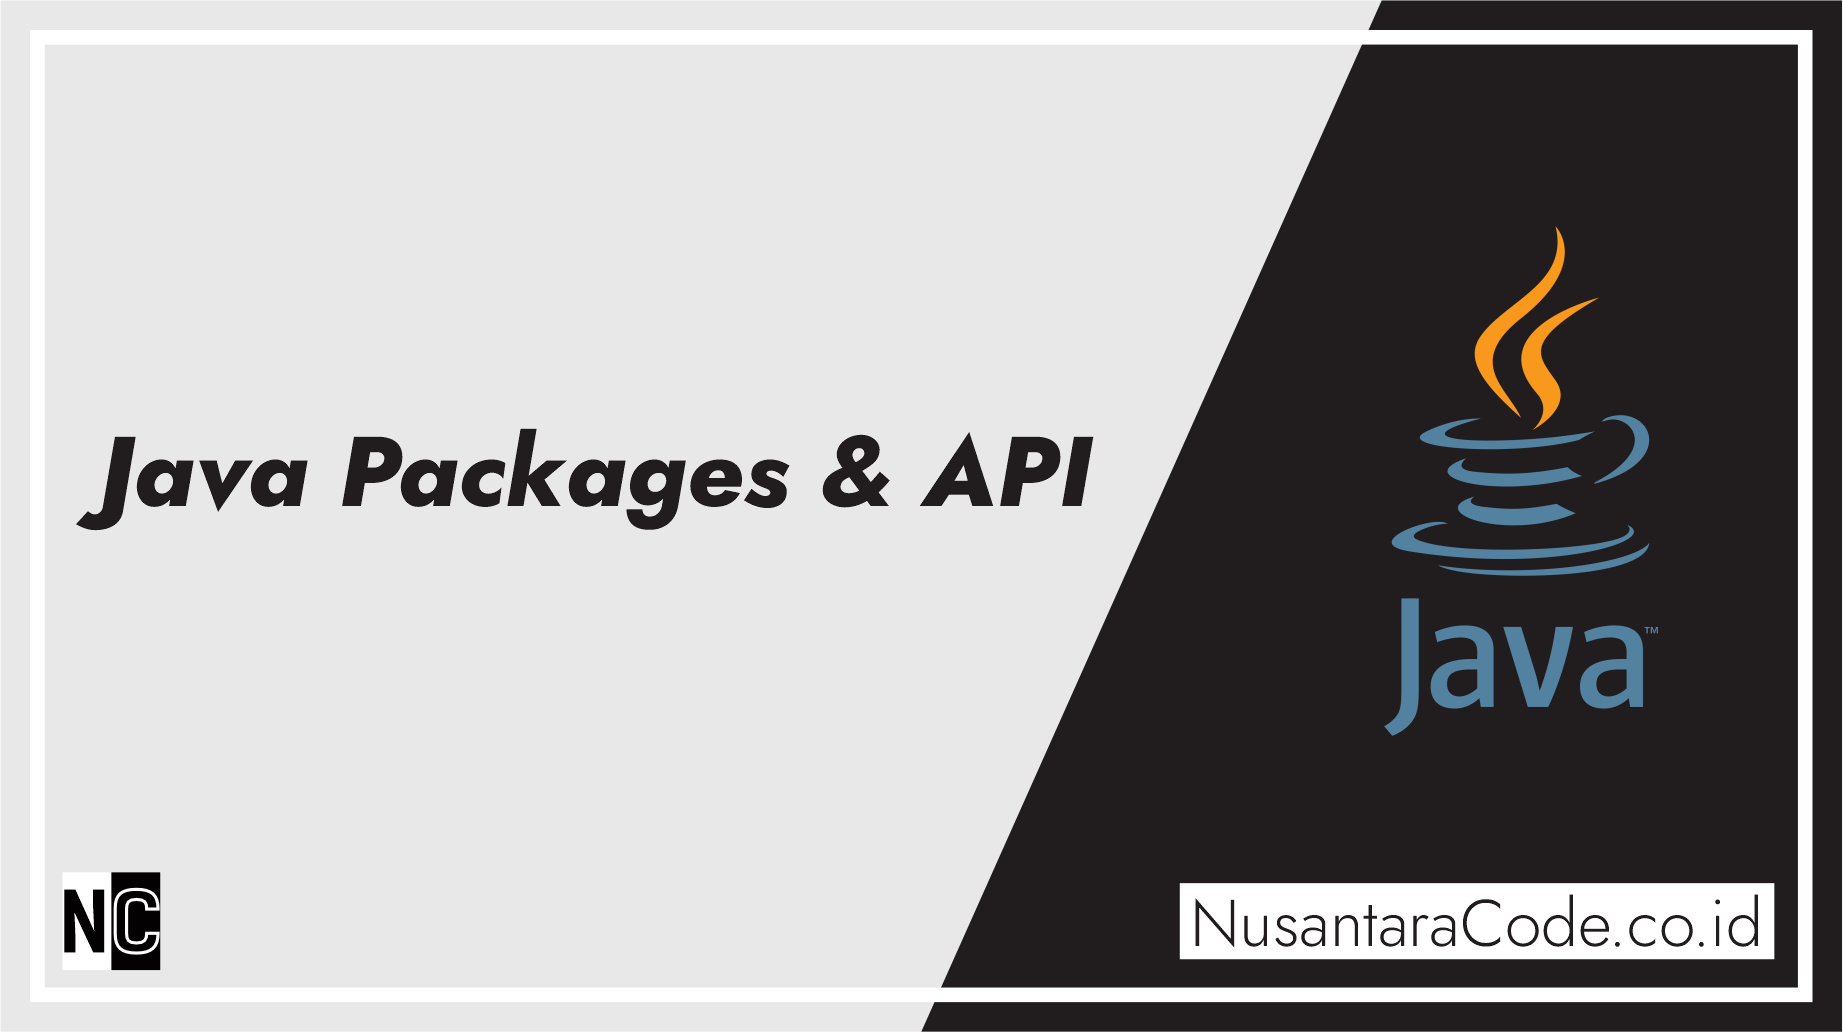 Java Packages & API